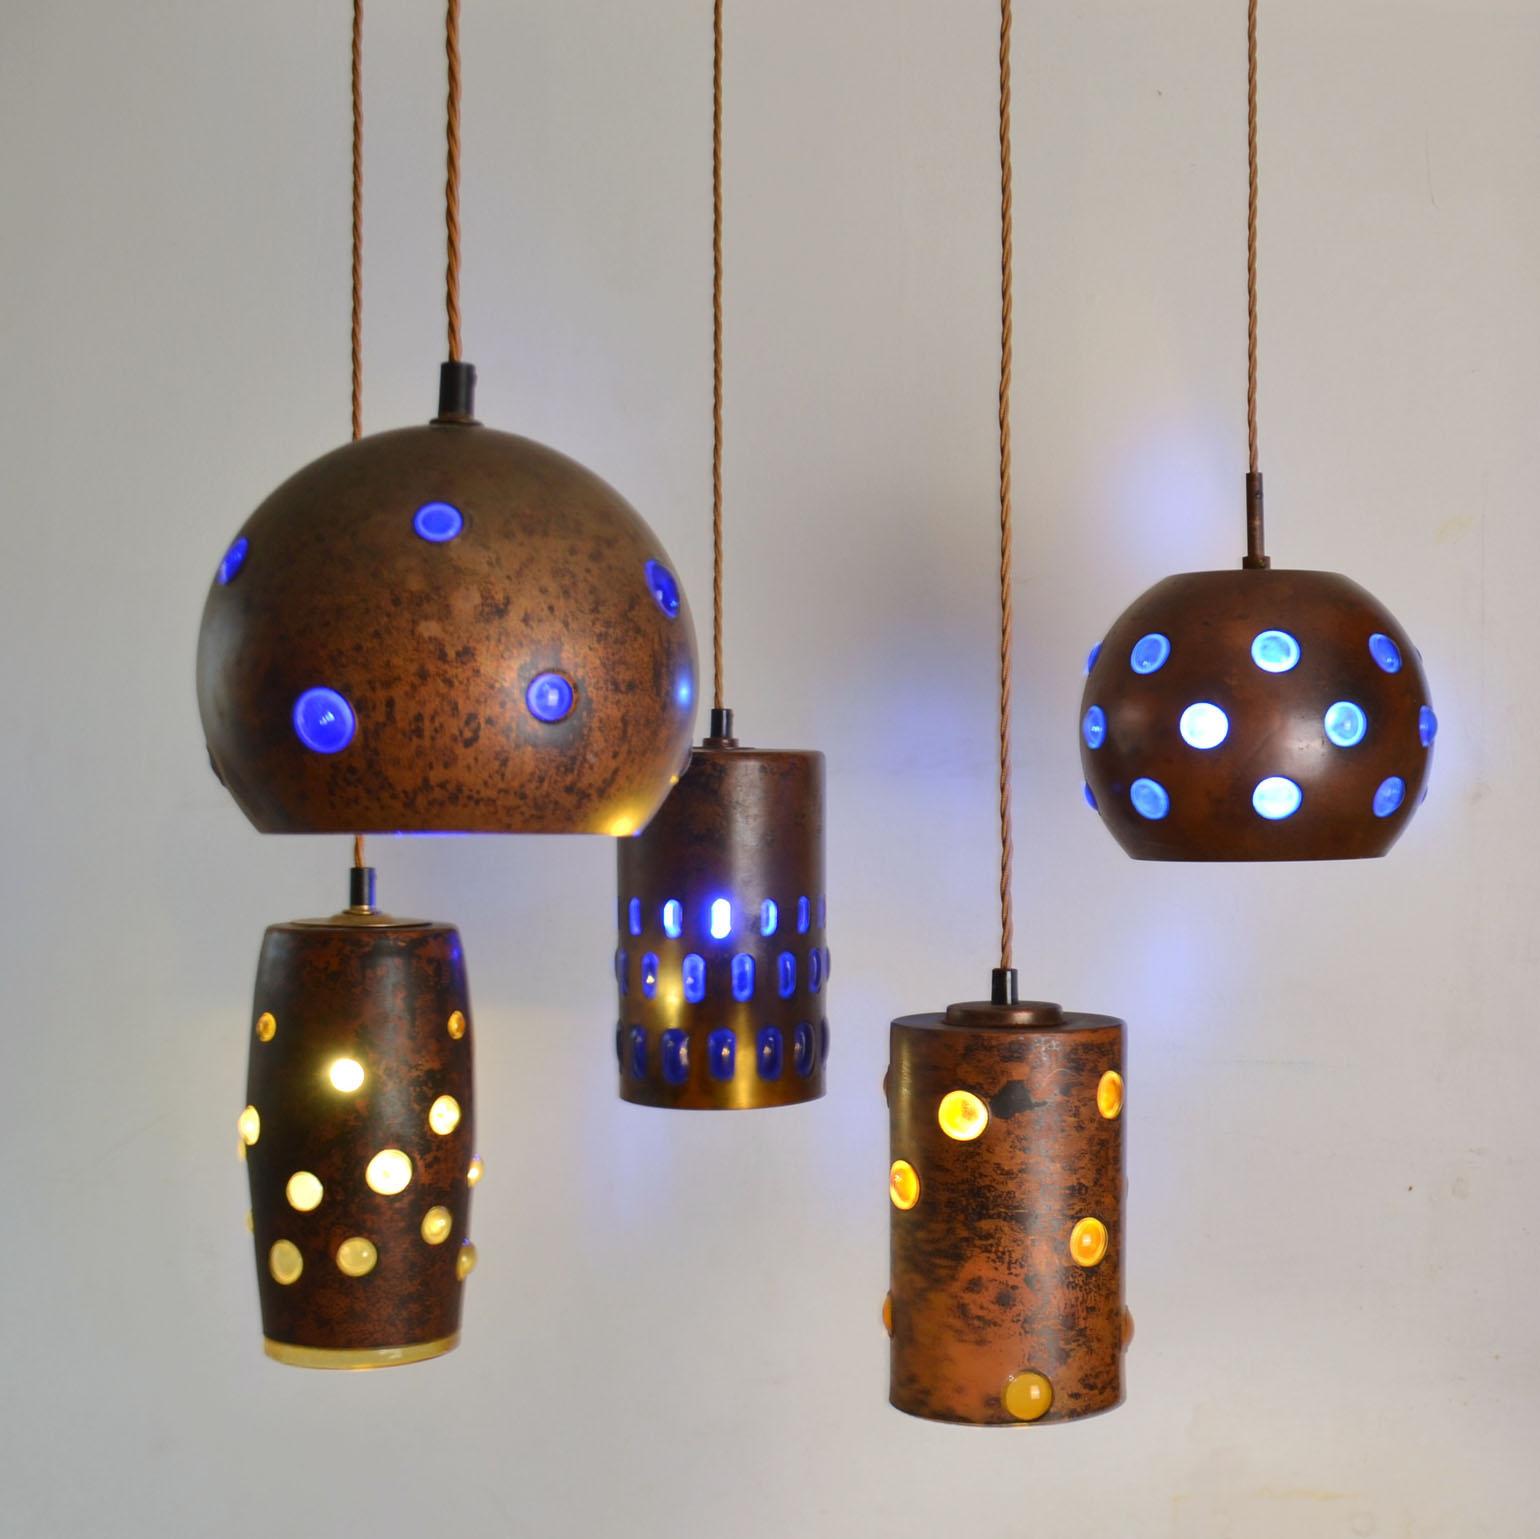 Mid-Century Modern blue and amber pendant lamps are made from blown glass & oxidized copper. They are all unique in execution. The deep blue and amber expanded glass is blown with regularity into external patinated copper spherical or rectangular